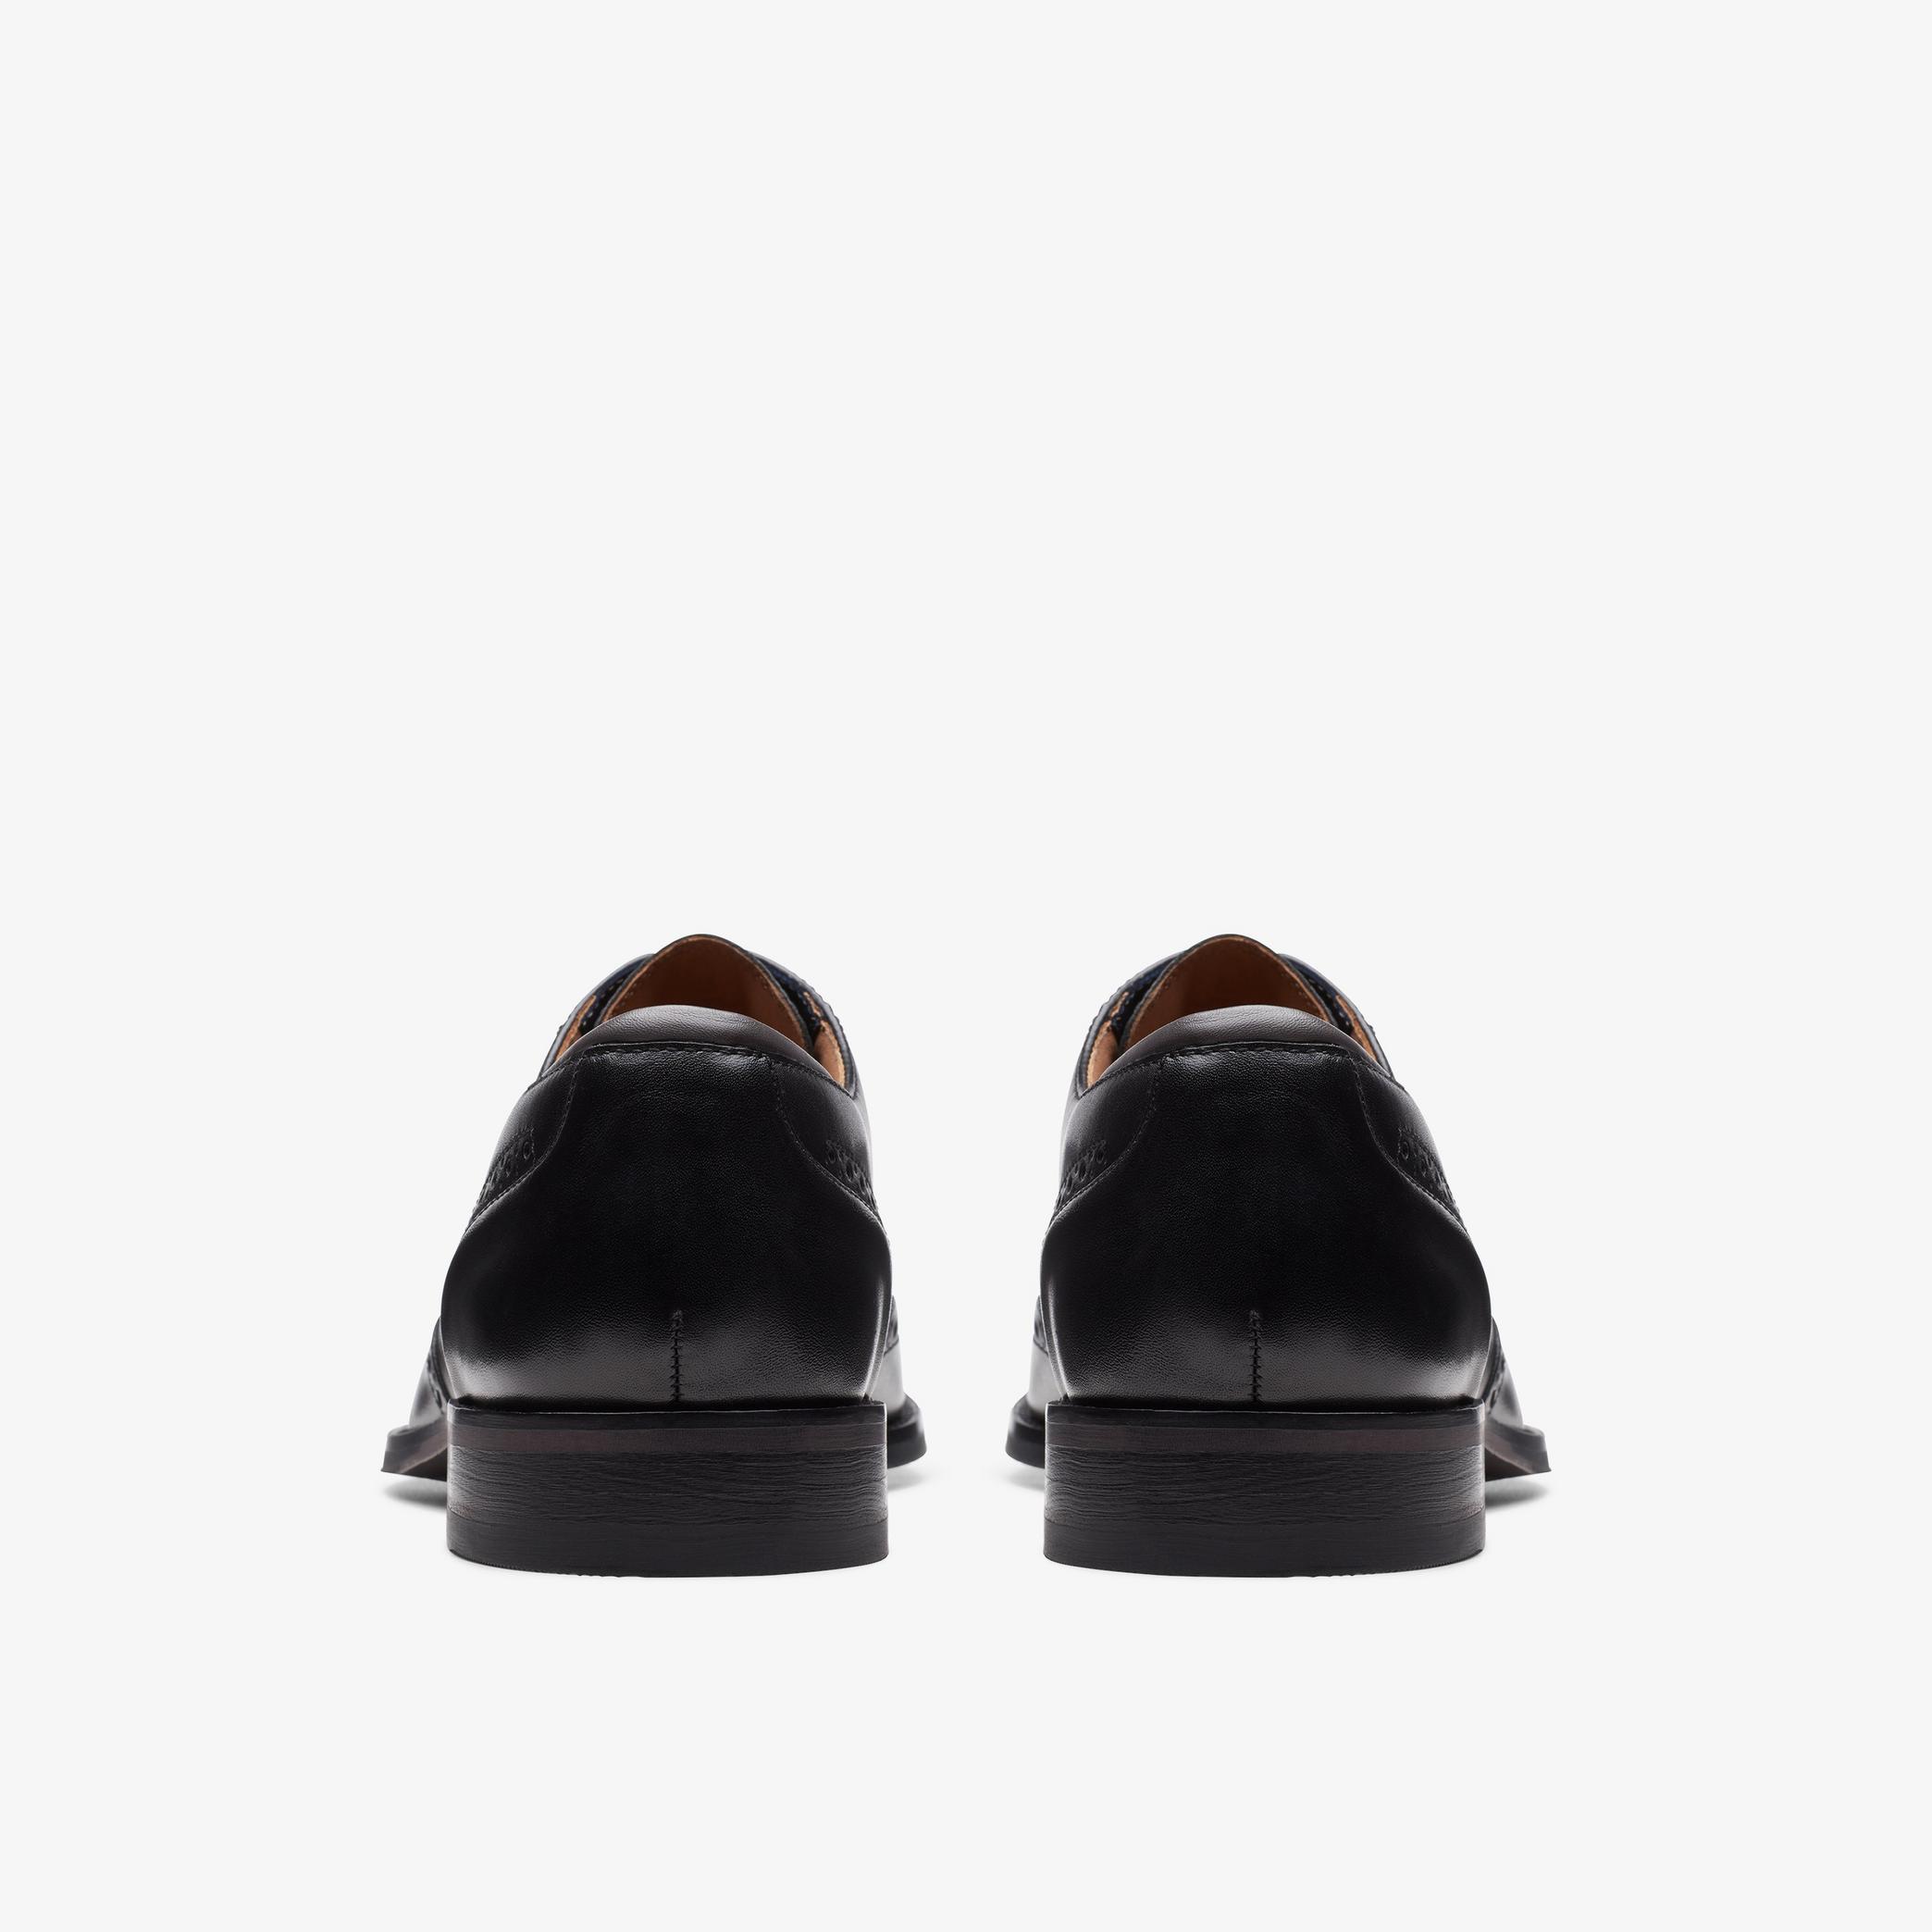 Craft Arlo Limit Black Leather Oxford Shoes, view 5 of 6